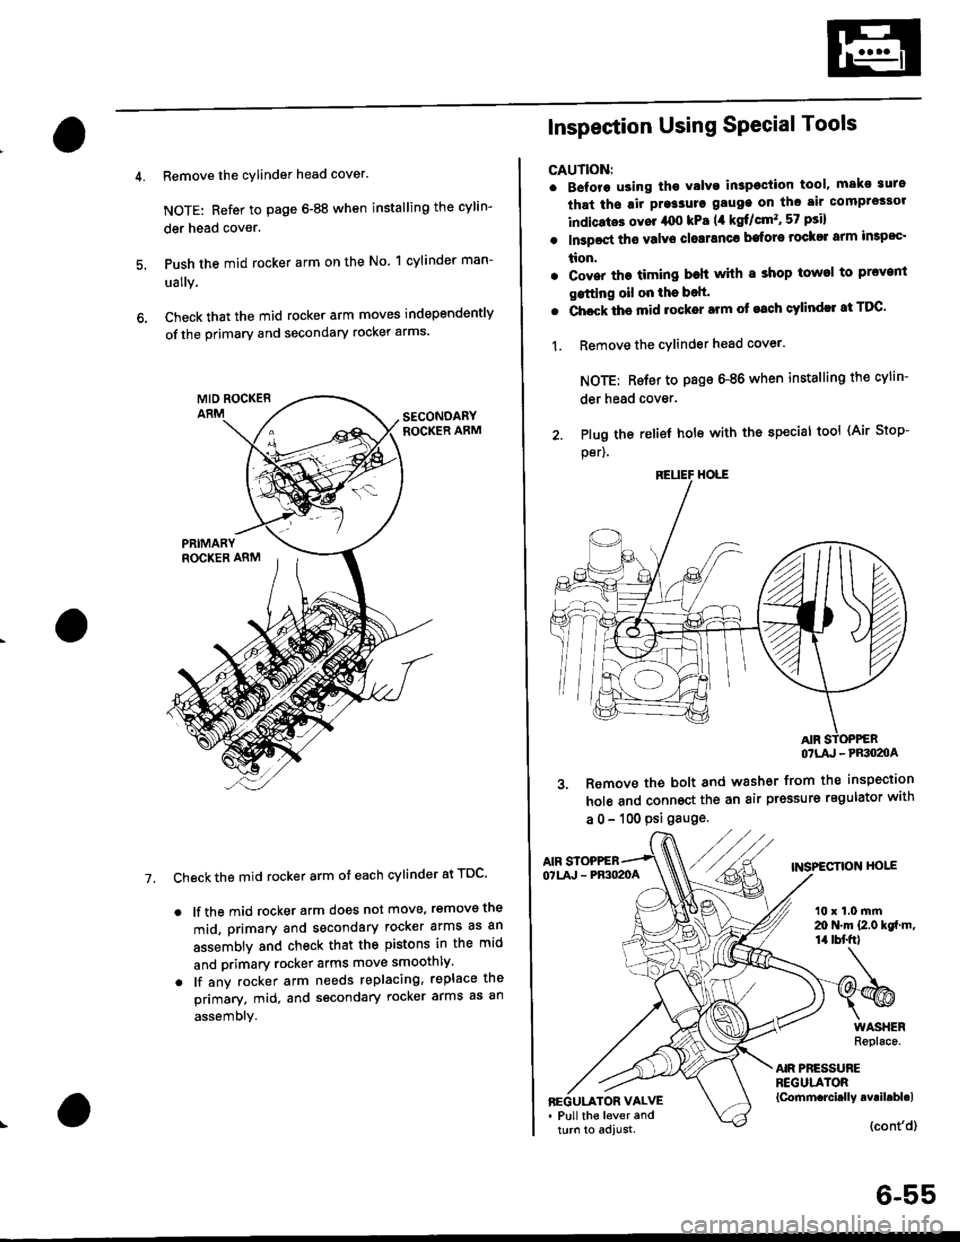 HONDA CIVIC 1996 6.G Owners Manual Remove the cylinder head cover.
NOTE: Refer to page 6-88 when installing the cylin-
der head cover.
Push the mid rocker arm on the No. 1 cylinder man-
ually.
Check that the mid rocker arm moves indepe